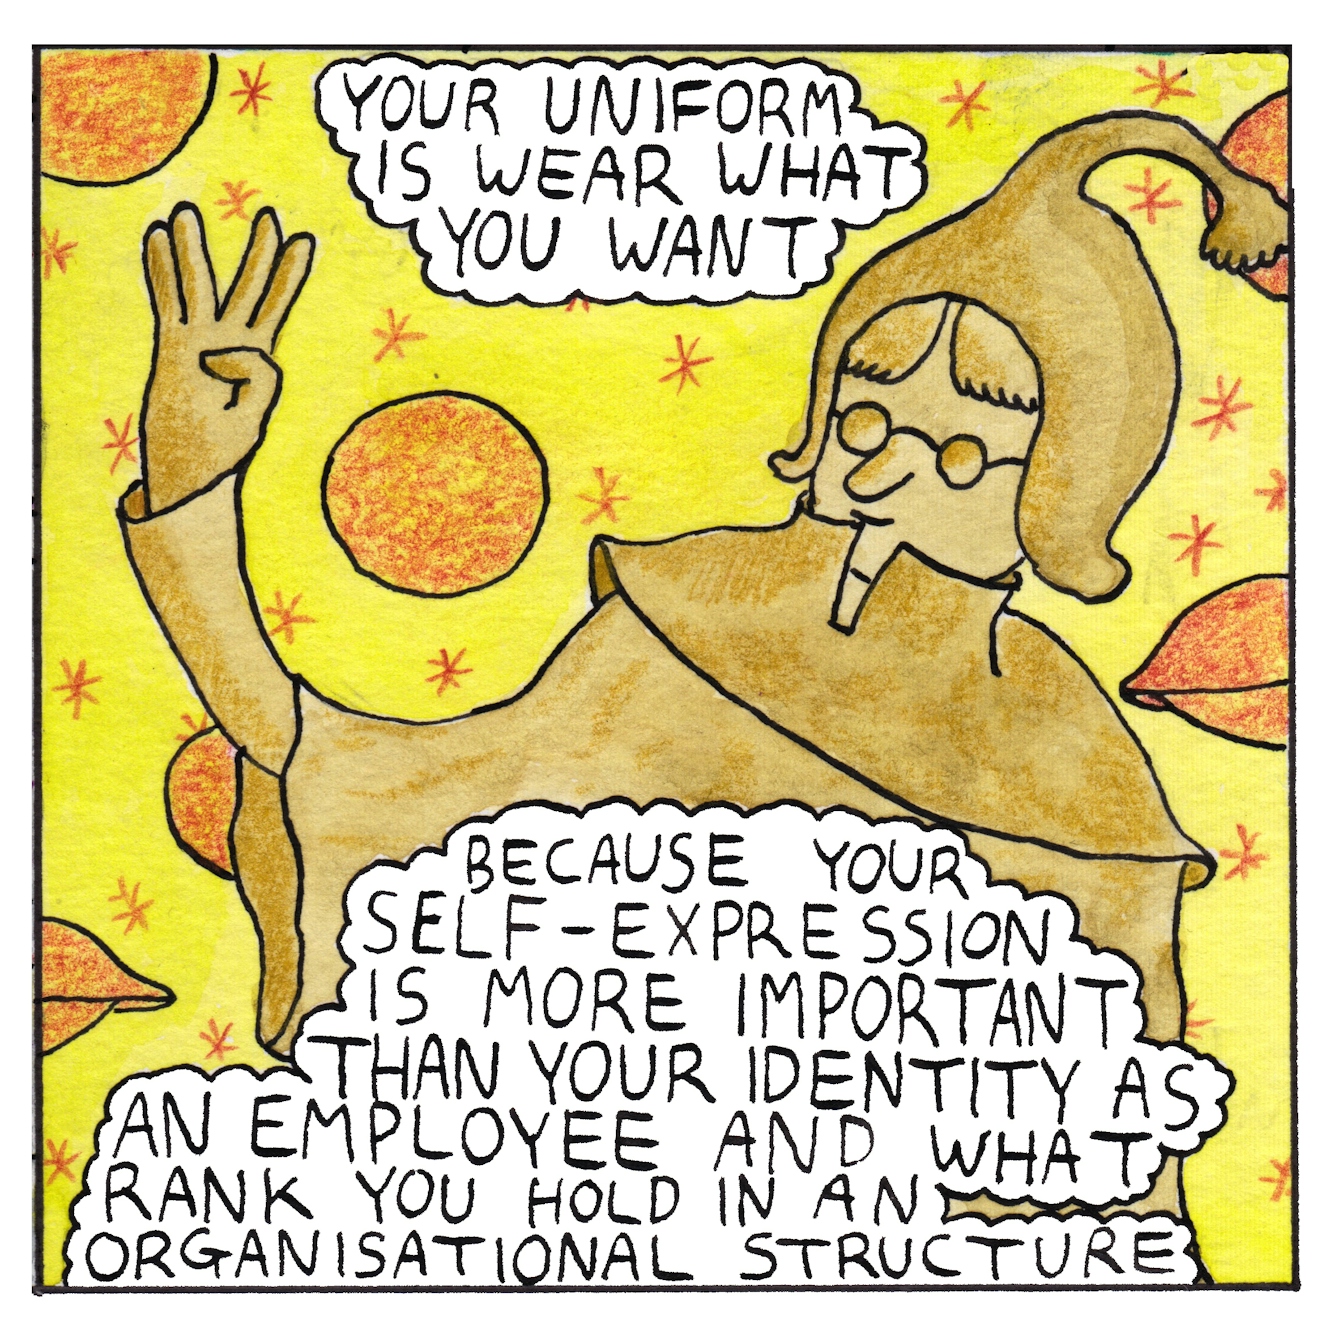 Panel 6 of a six-panel comic drawn with ink, watercolour and colour pencils: A smiling golden character is wearing round glasses, a hat that covers their ears and has a dangly pom-pom and loose robes with a high collar. They are giving a 'Star Trek' Vulcan salute with their right hand. In the background are stars and planets. Two text bubbles read: Your uniform is wear-what-you-want, because your self-expression is more important than your identity as an employee and what rank you hold in an organisational structure"